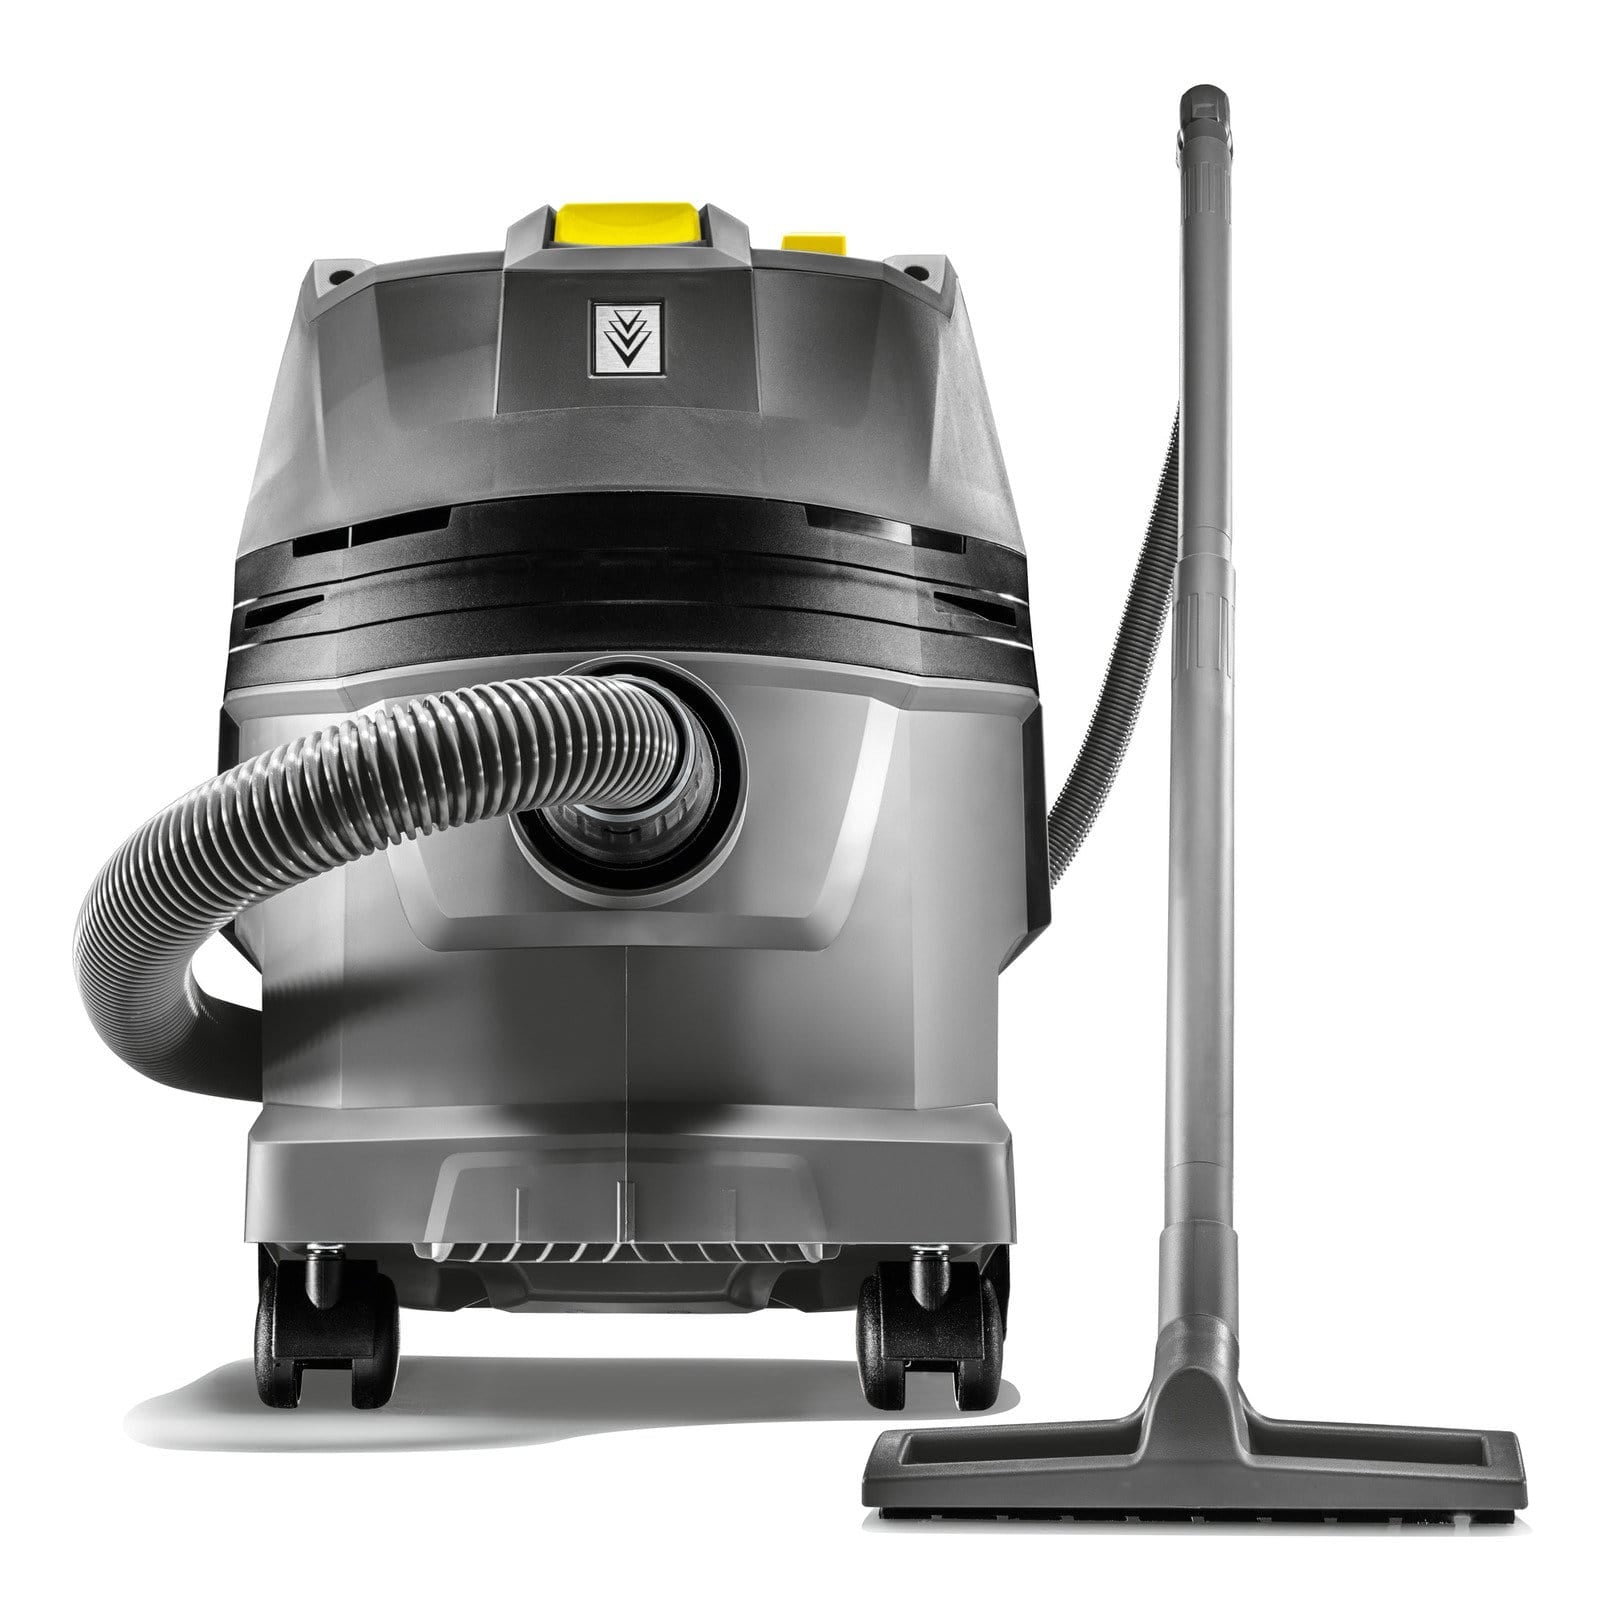 Karcher Battery-operated Wet and Dry Vacuum Cleaner - NT 22/1 Ap Bp Pack L | Supply Master | Accra, Ghana Tools Building Steel Engineering Hardware tool